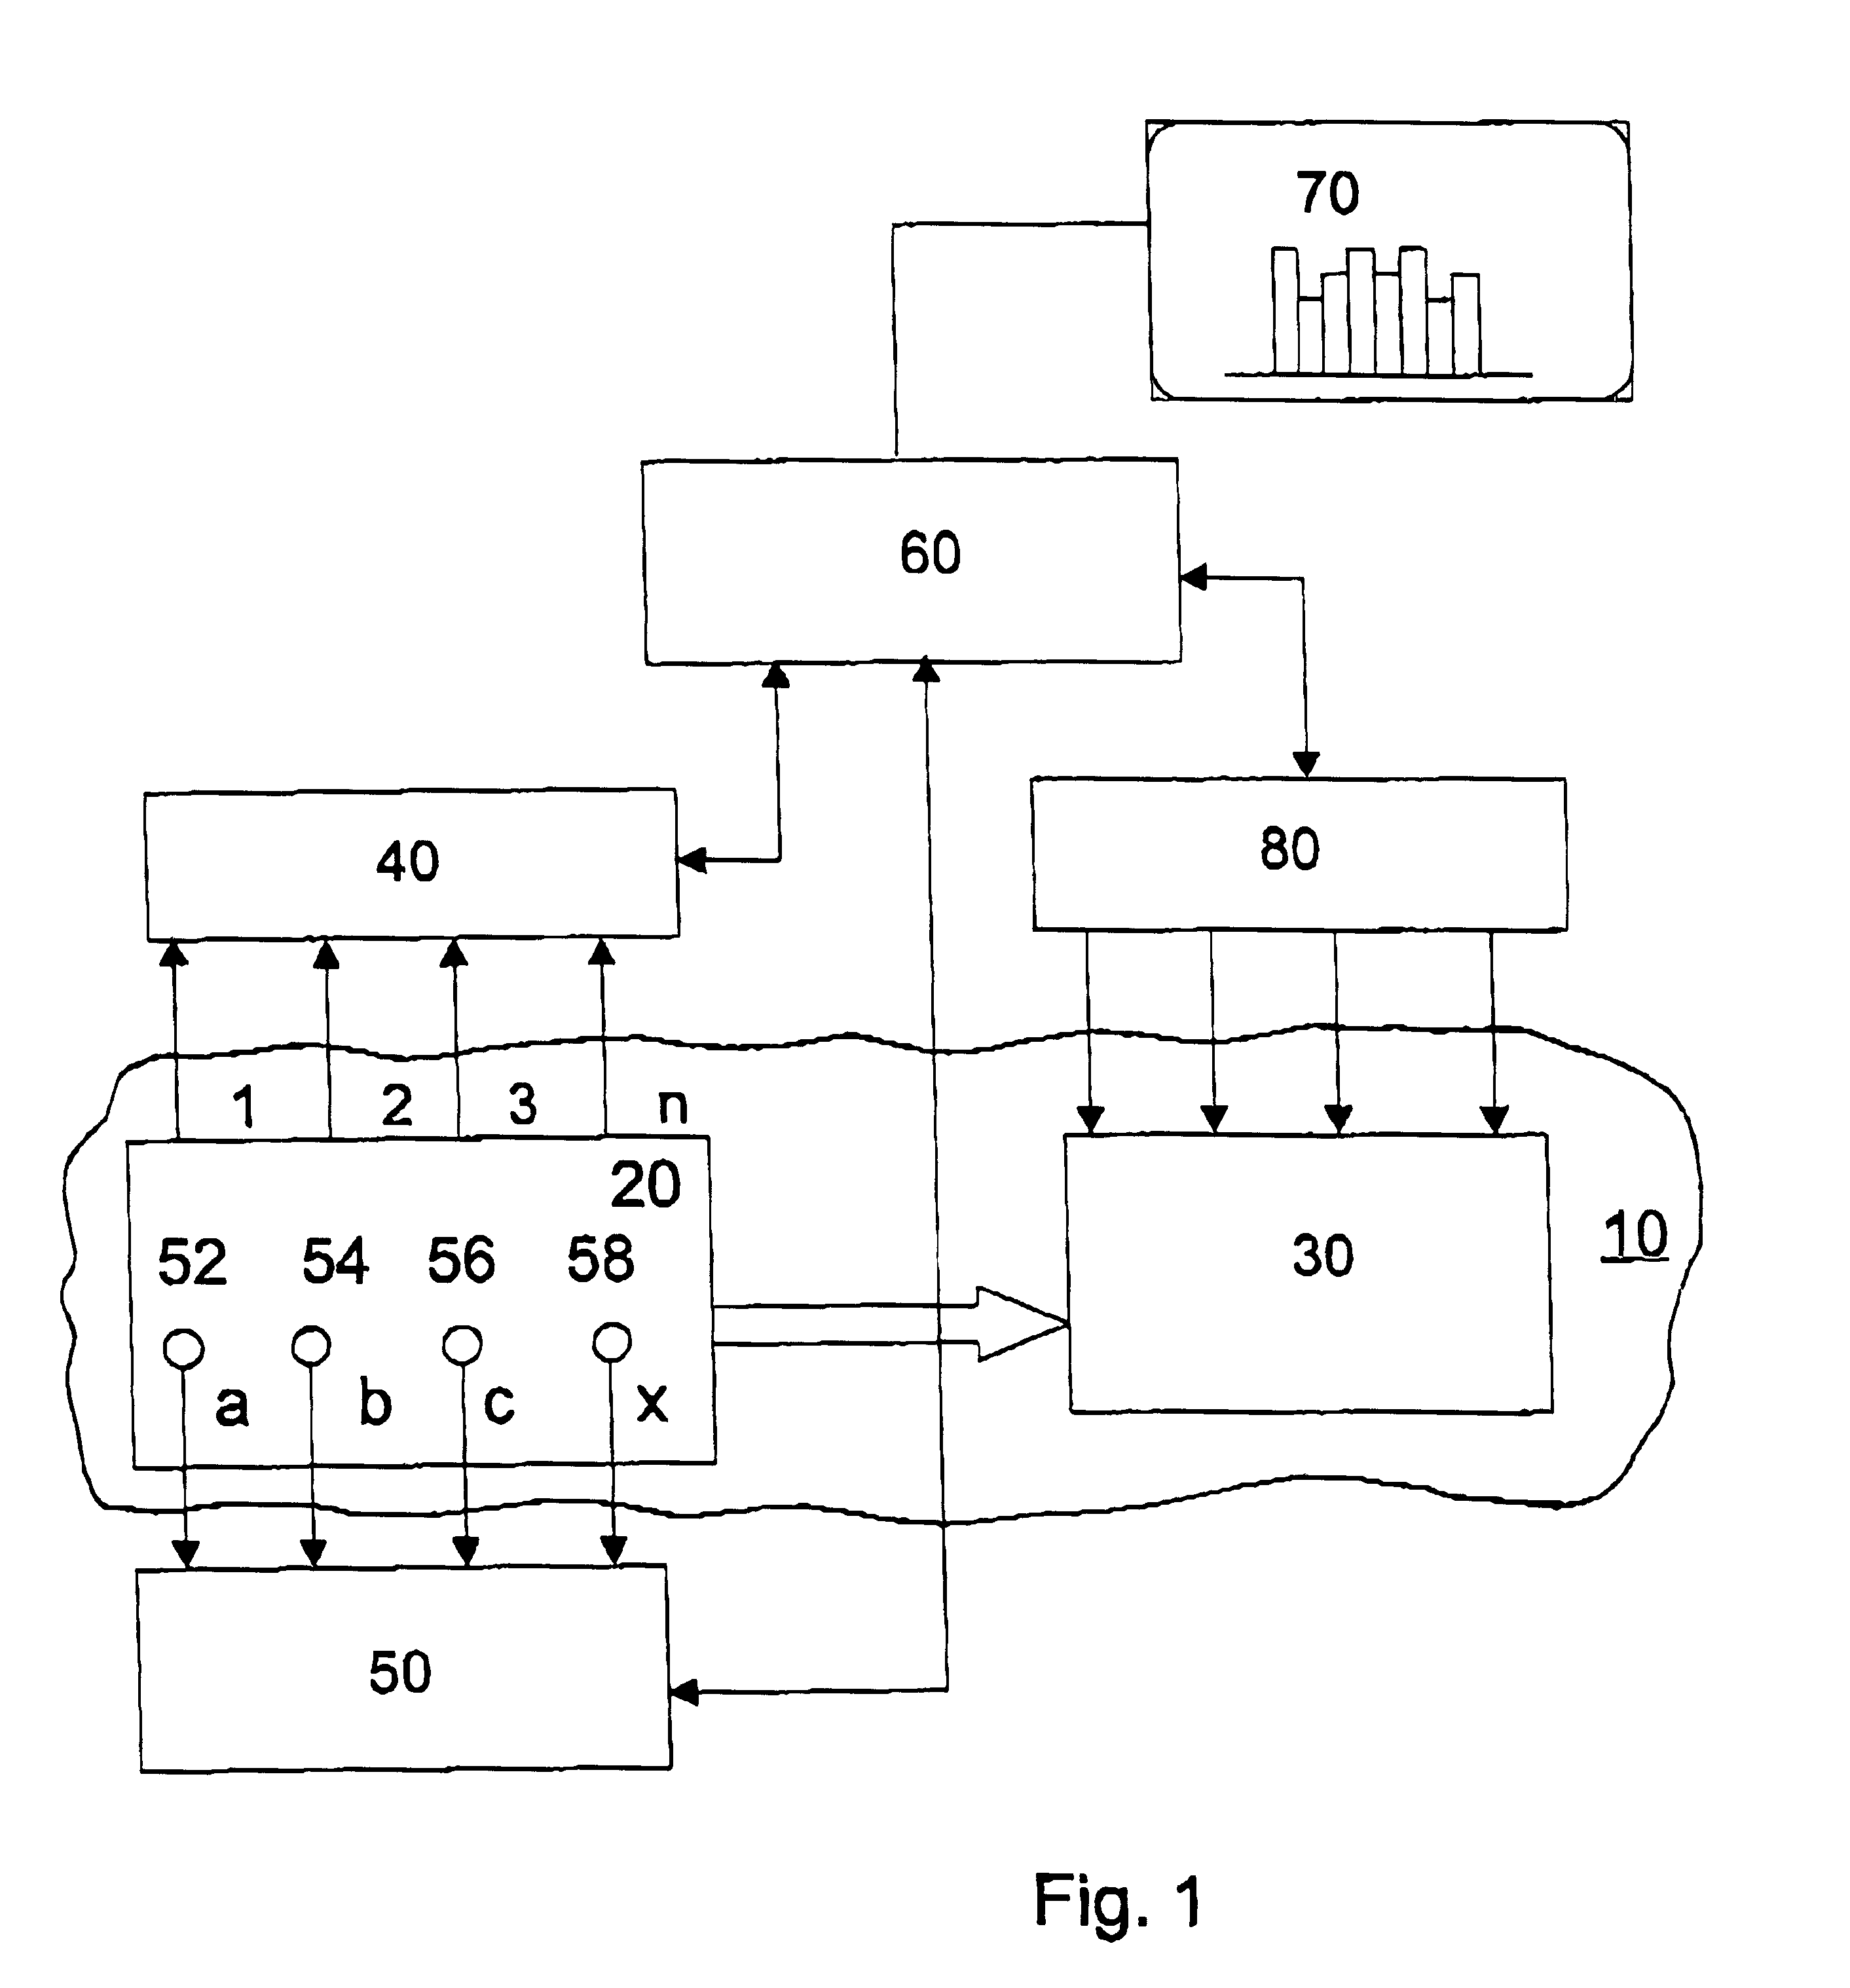 Method and device for controlling an essentially continuous process